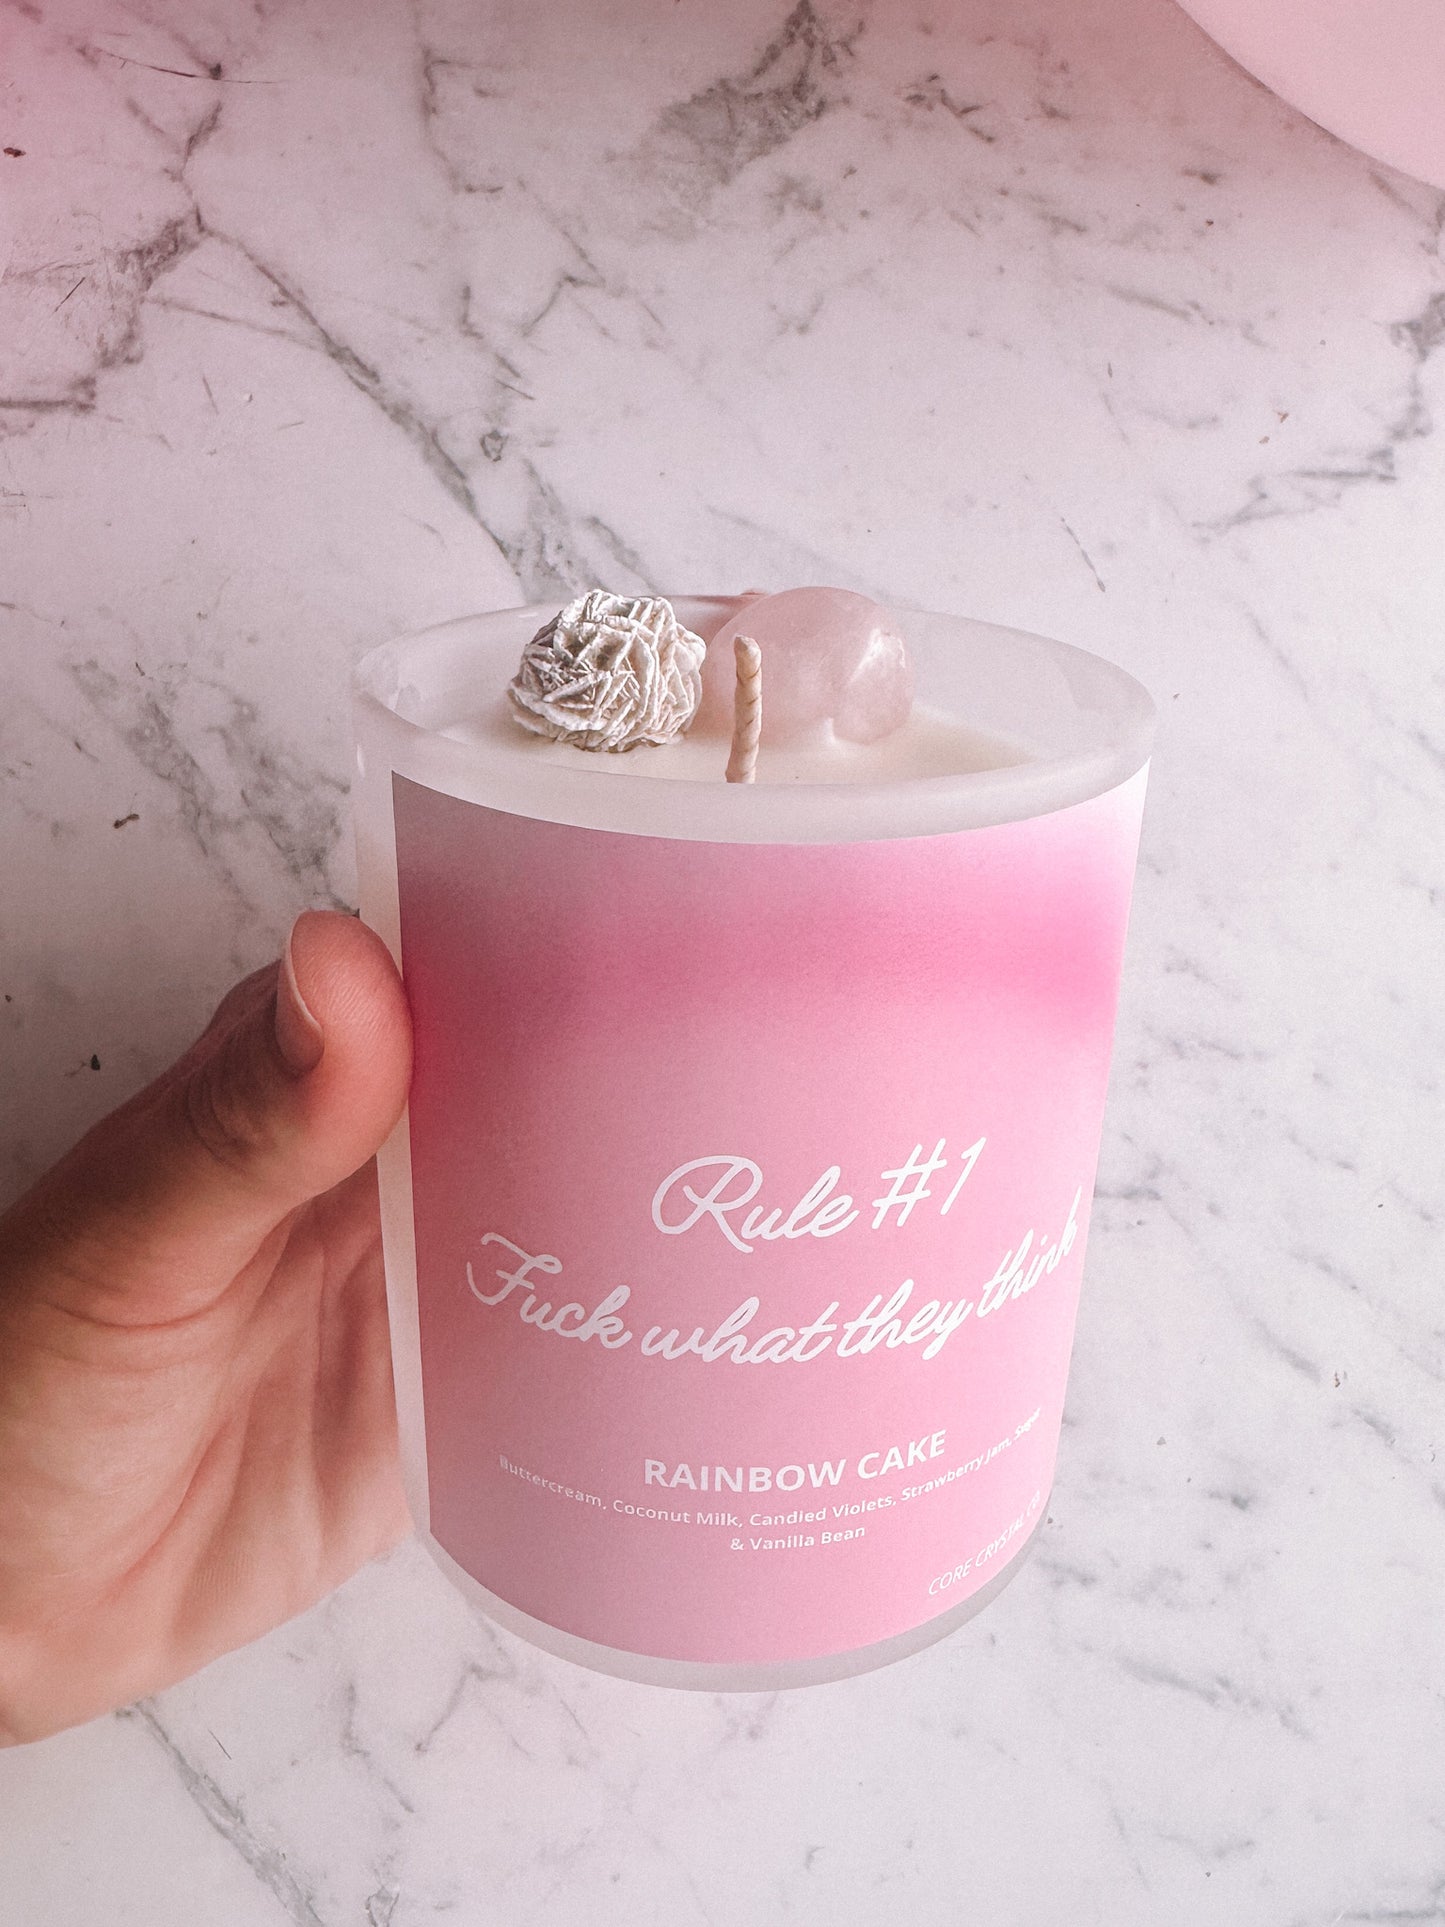 Rainbow Cake Limited Edition Candle